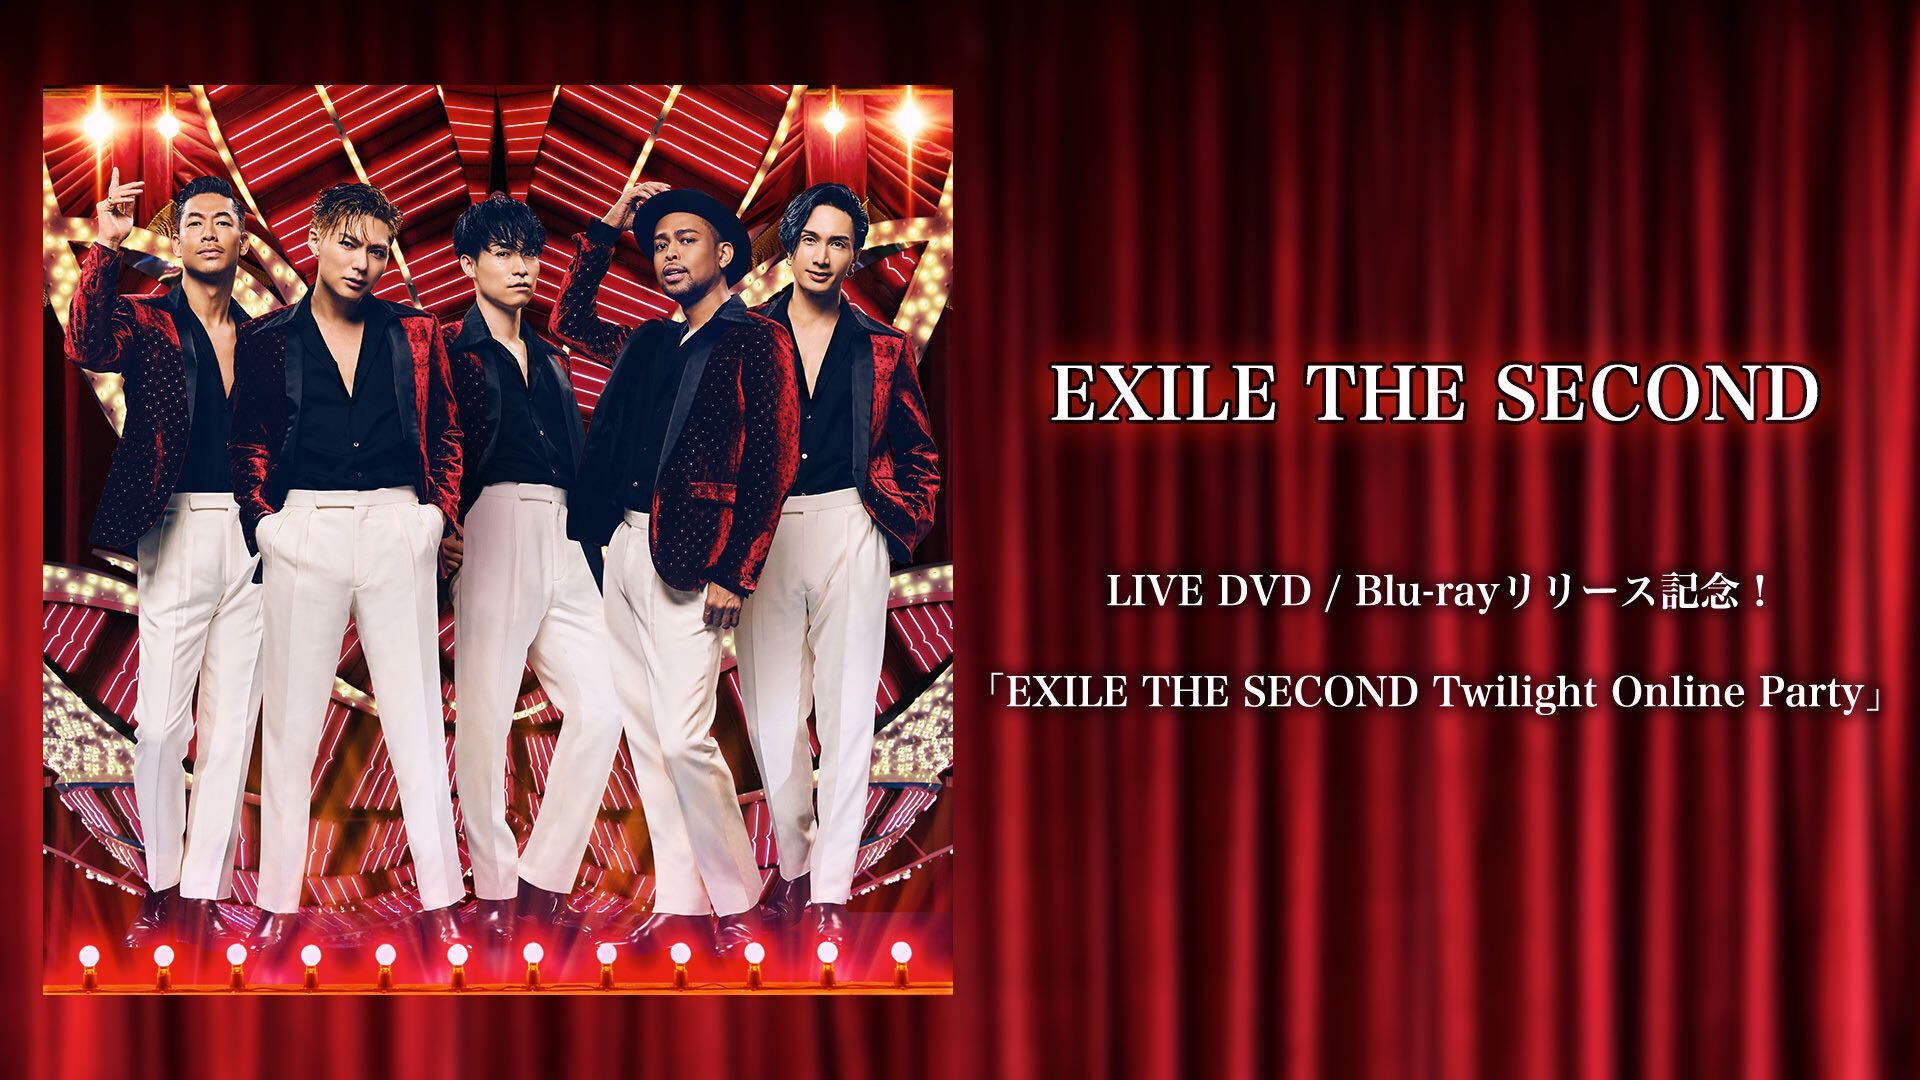 Commemorating the release of LIVE DVD / Blu-ray! EXILE THE SECOND